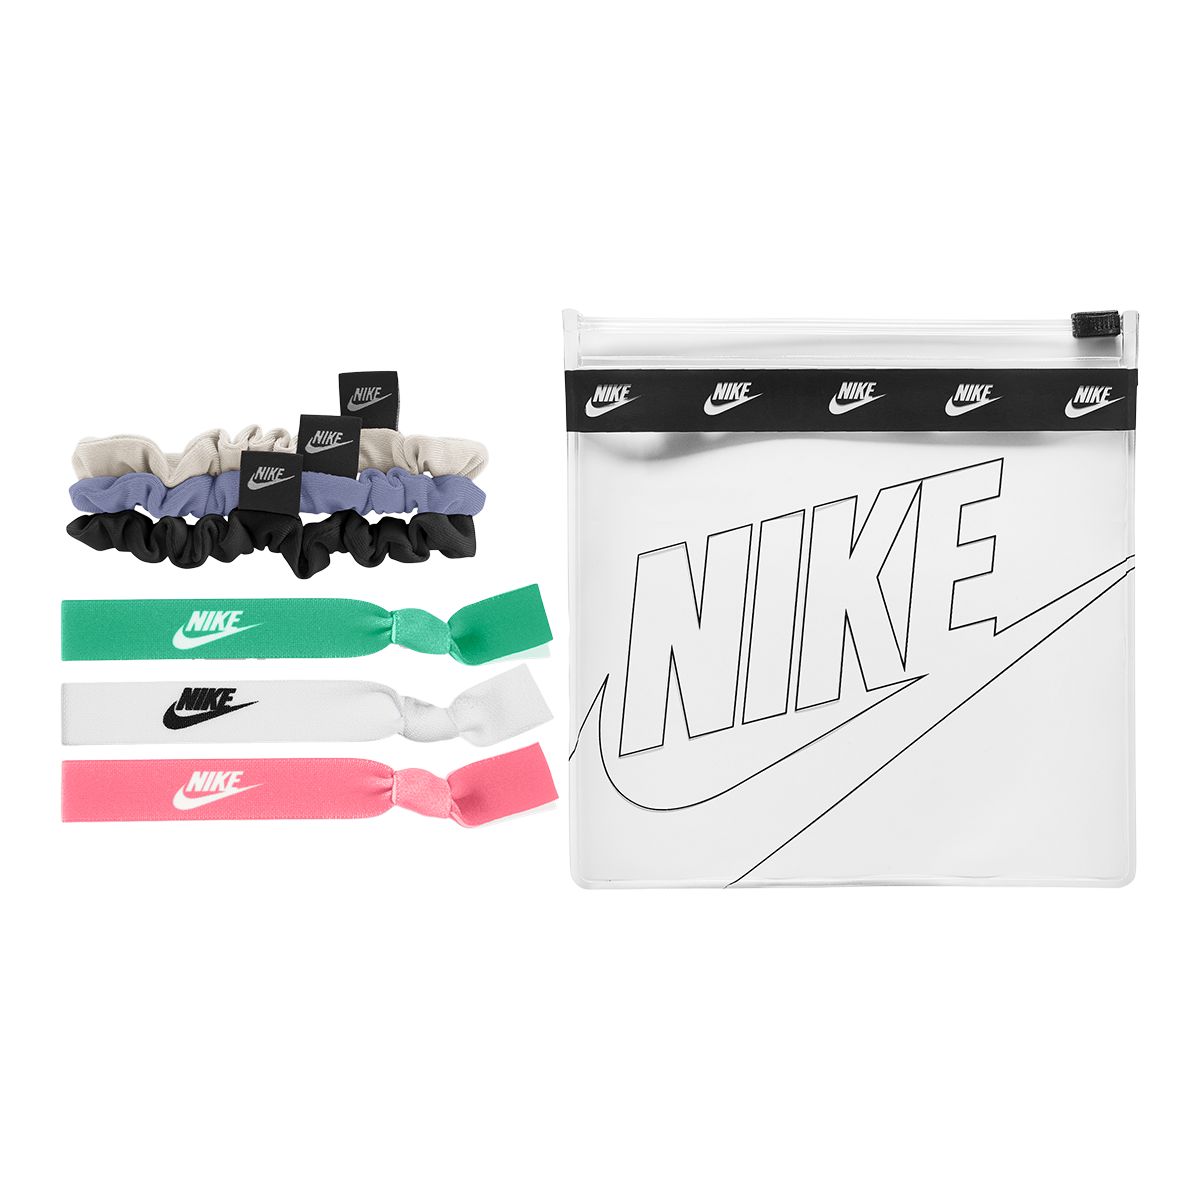 Nike Women's Pouch Hairband - 6 Pack